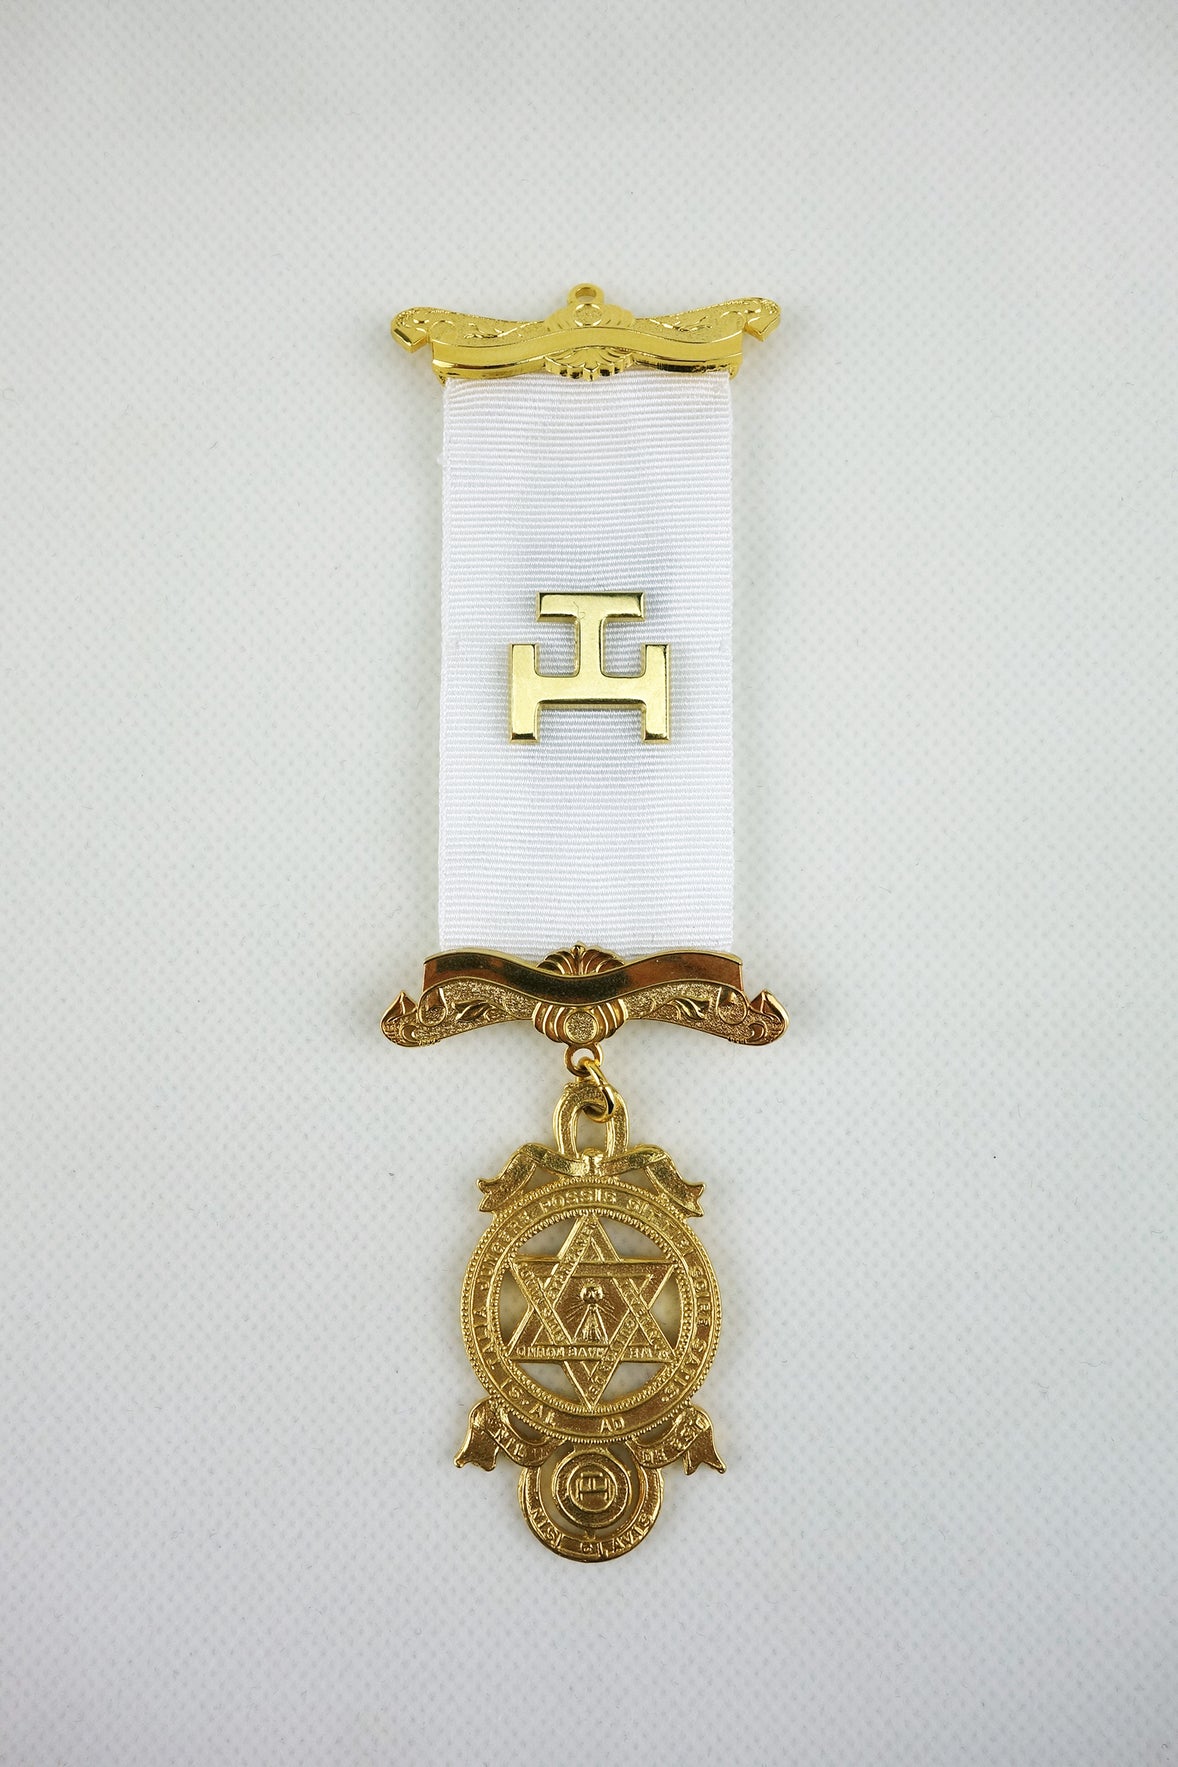 Royal Arch Chapter Companion Breast Jewel